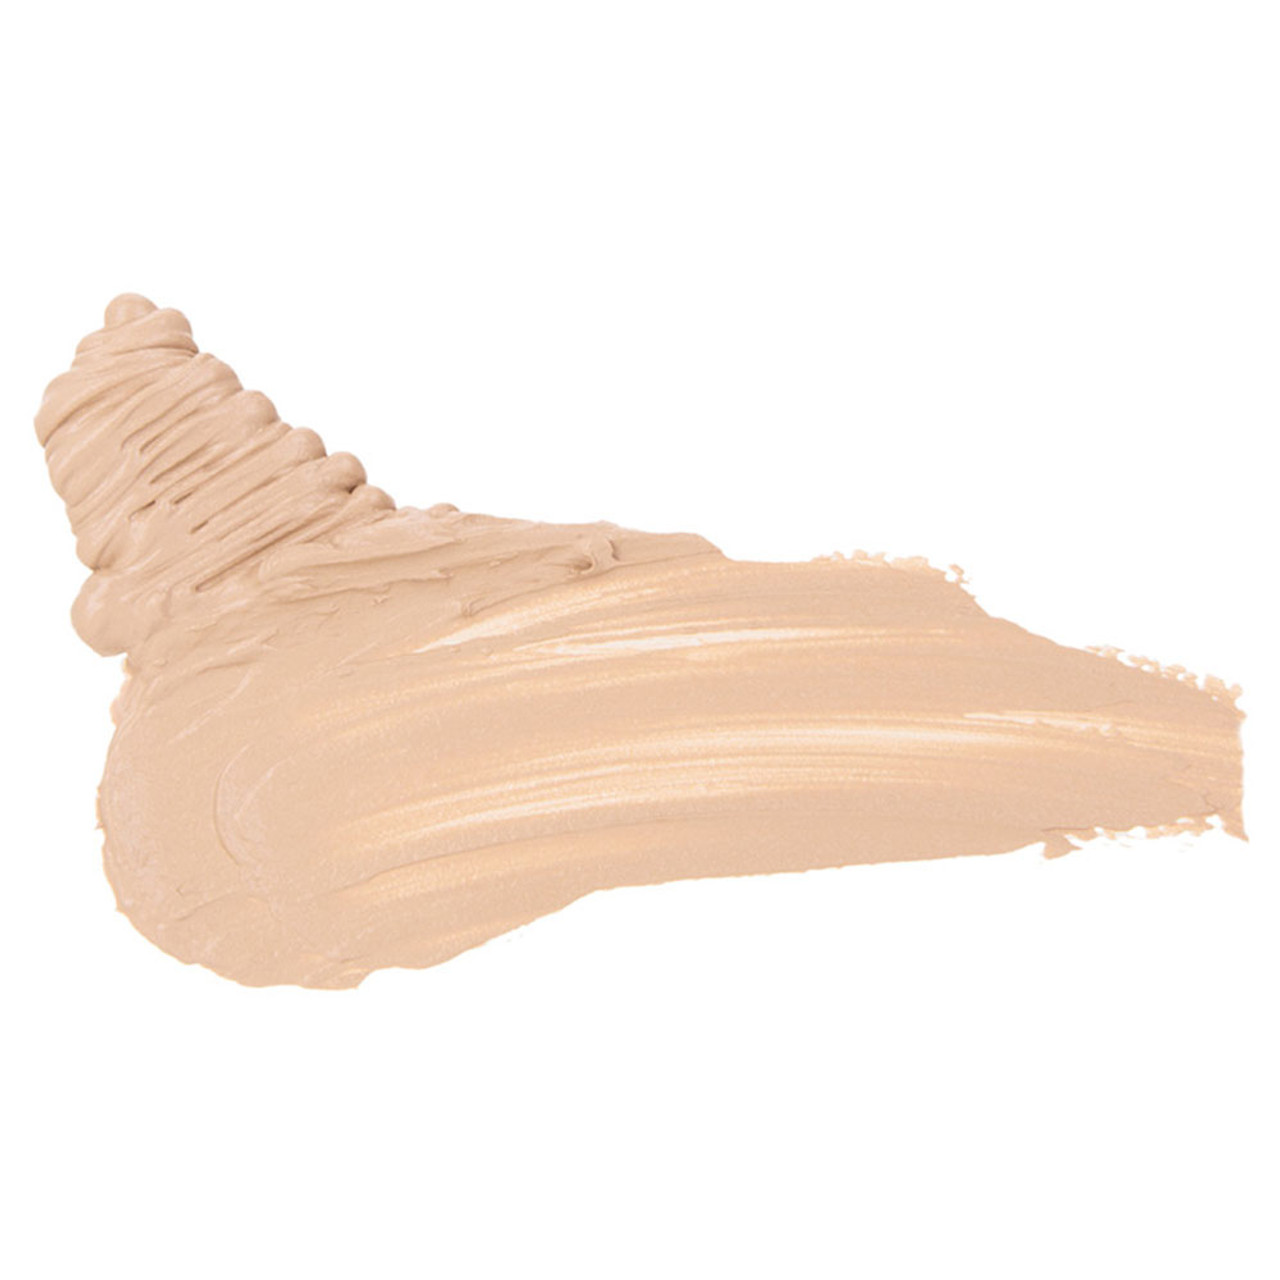 Dermablend Blurring Mousse Camo Oil-Free Foundation